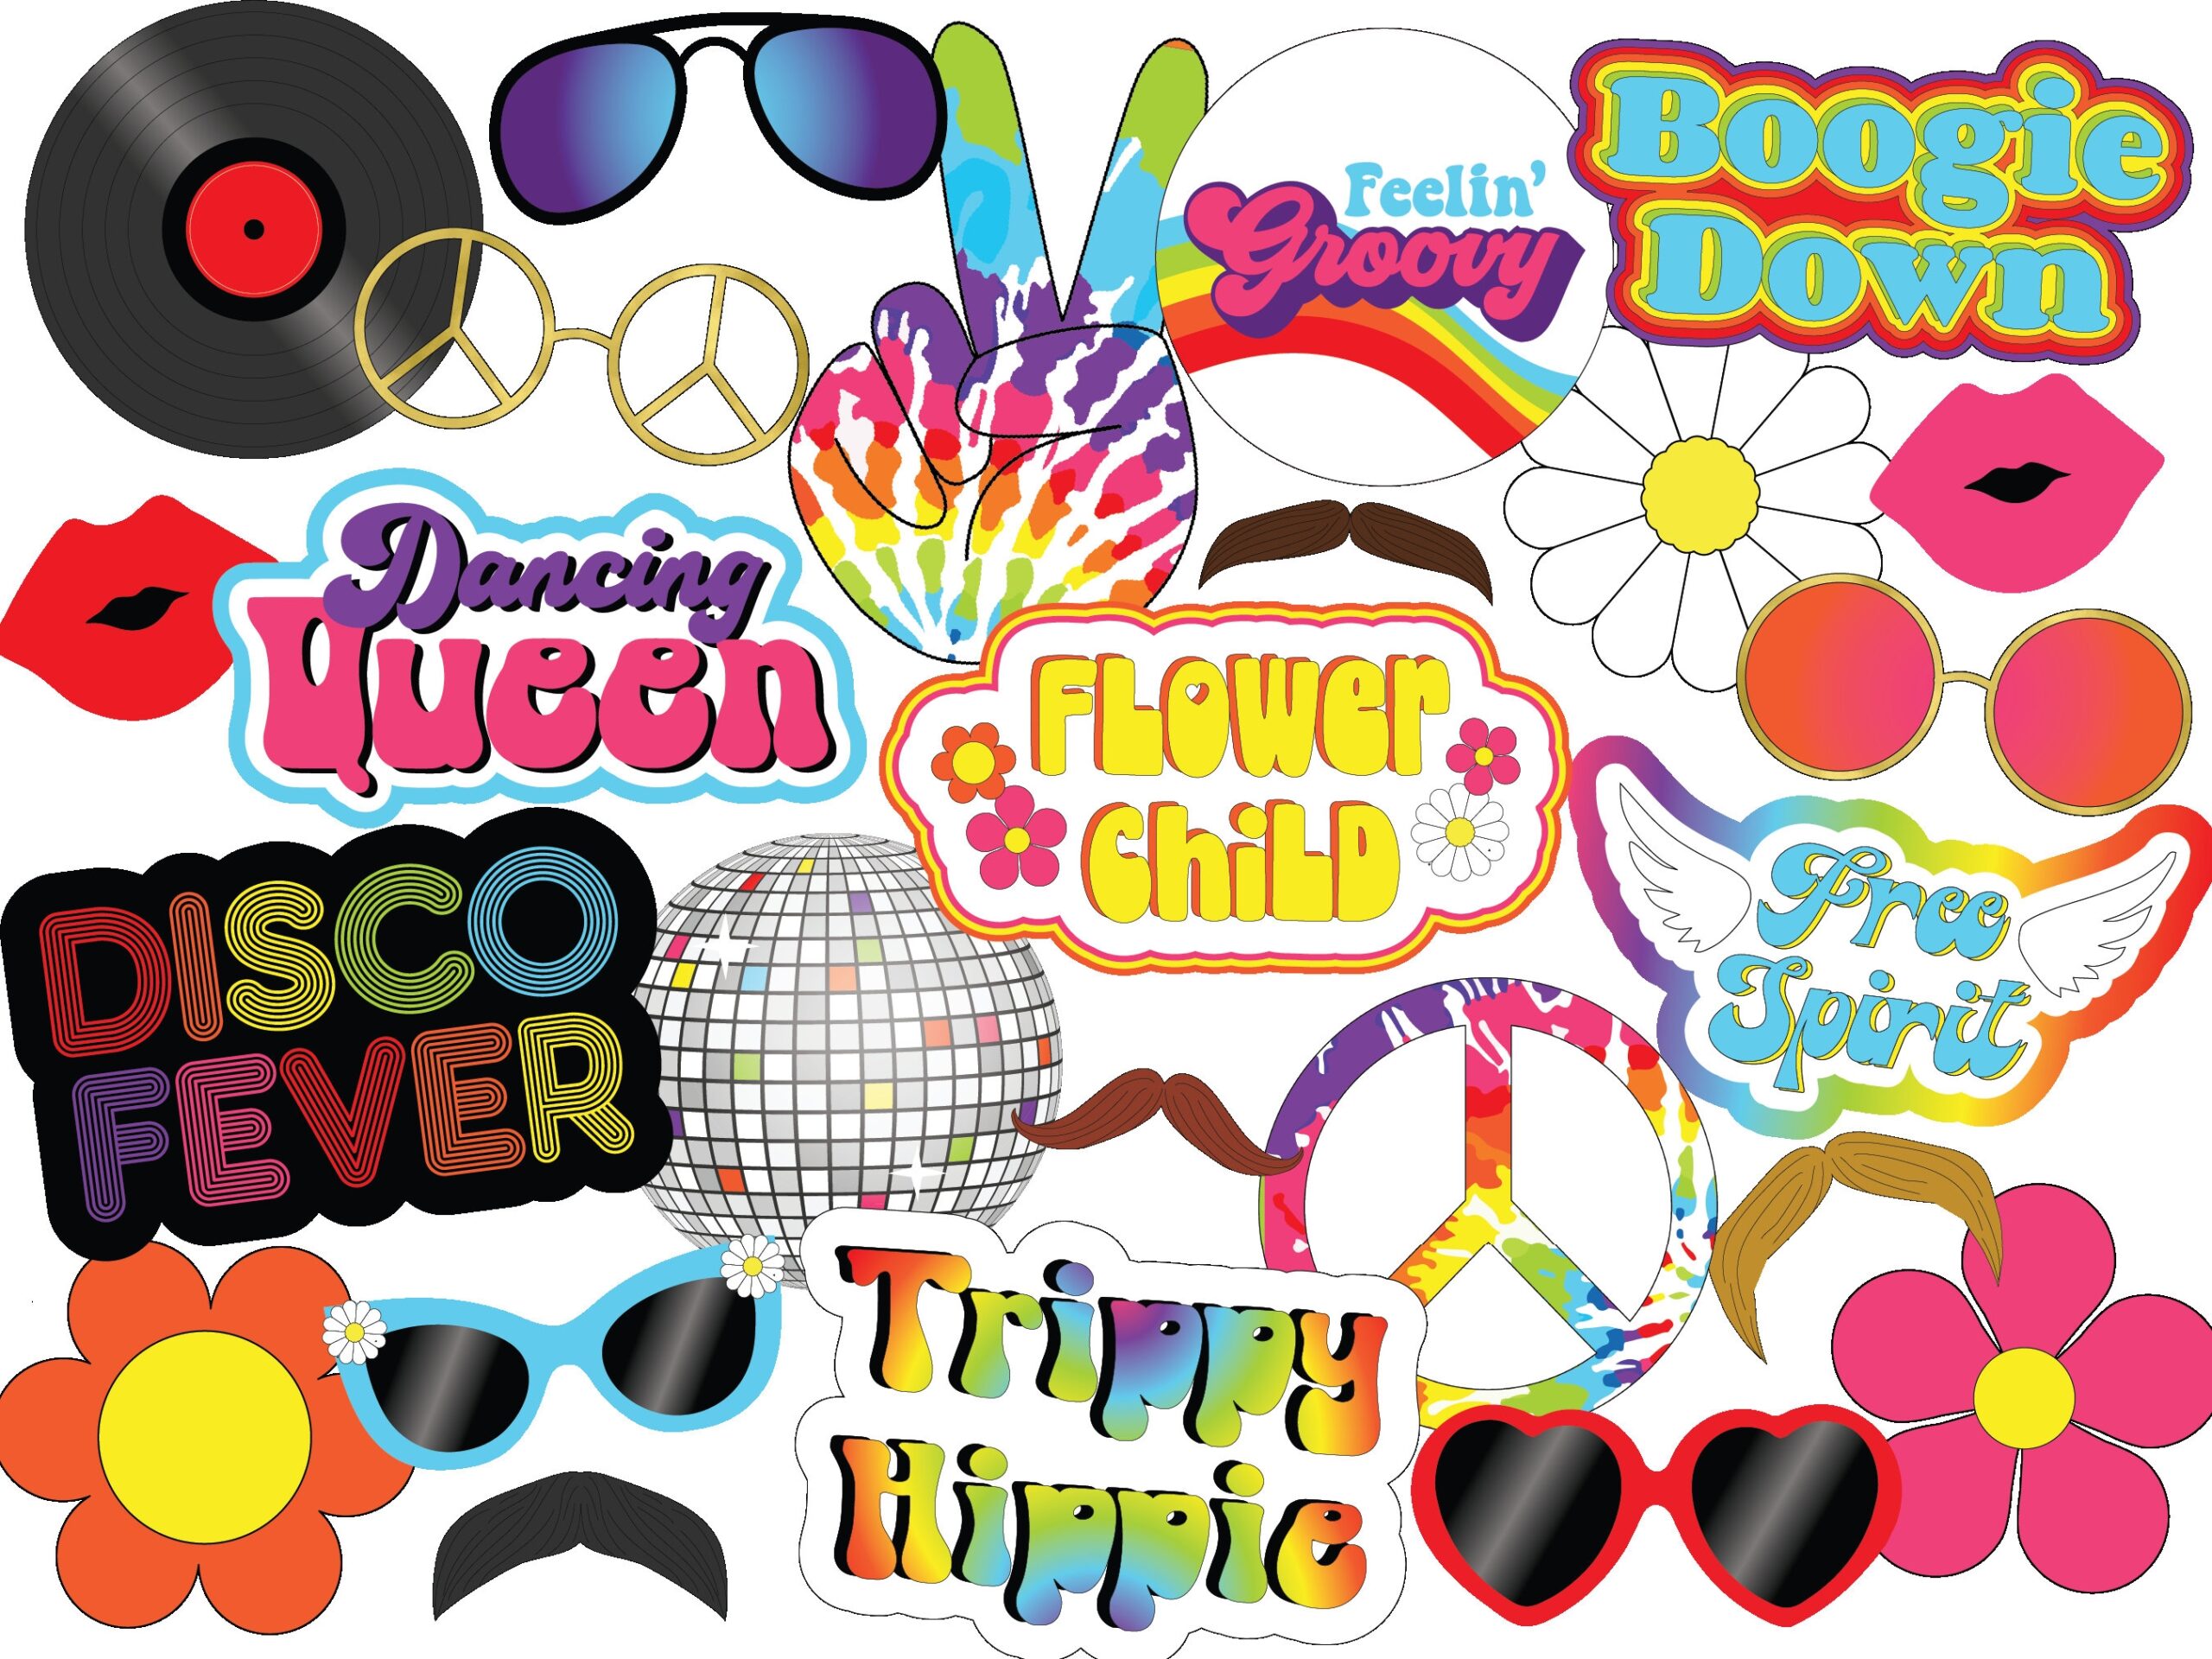 UNEDITABLE 70s Themed Party Photo Booth Props Disco Party Props Psychedelic Rainbow Digital Photo Props Groovy Printable Props Flowe Etsy - Free Printable 70's Photo Booth Props